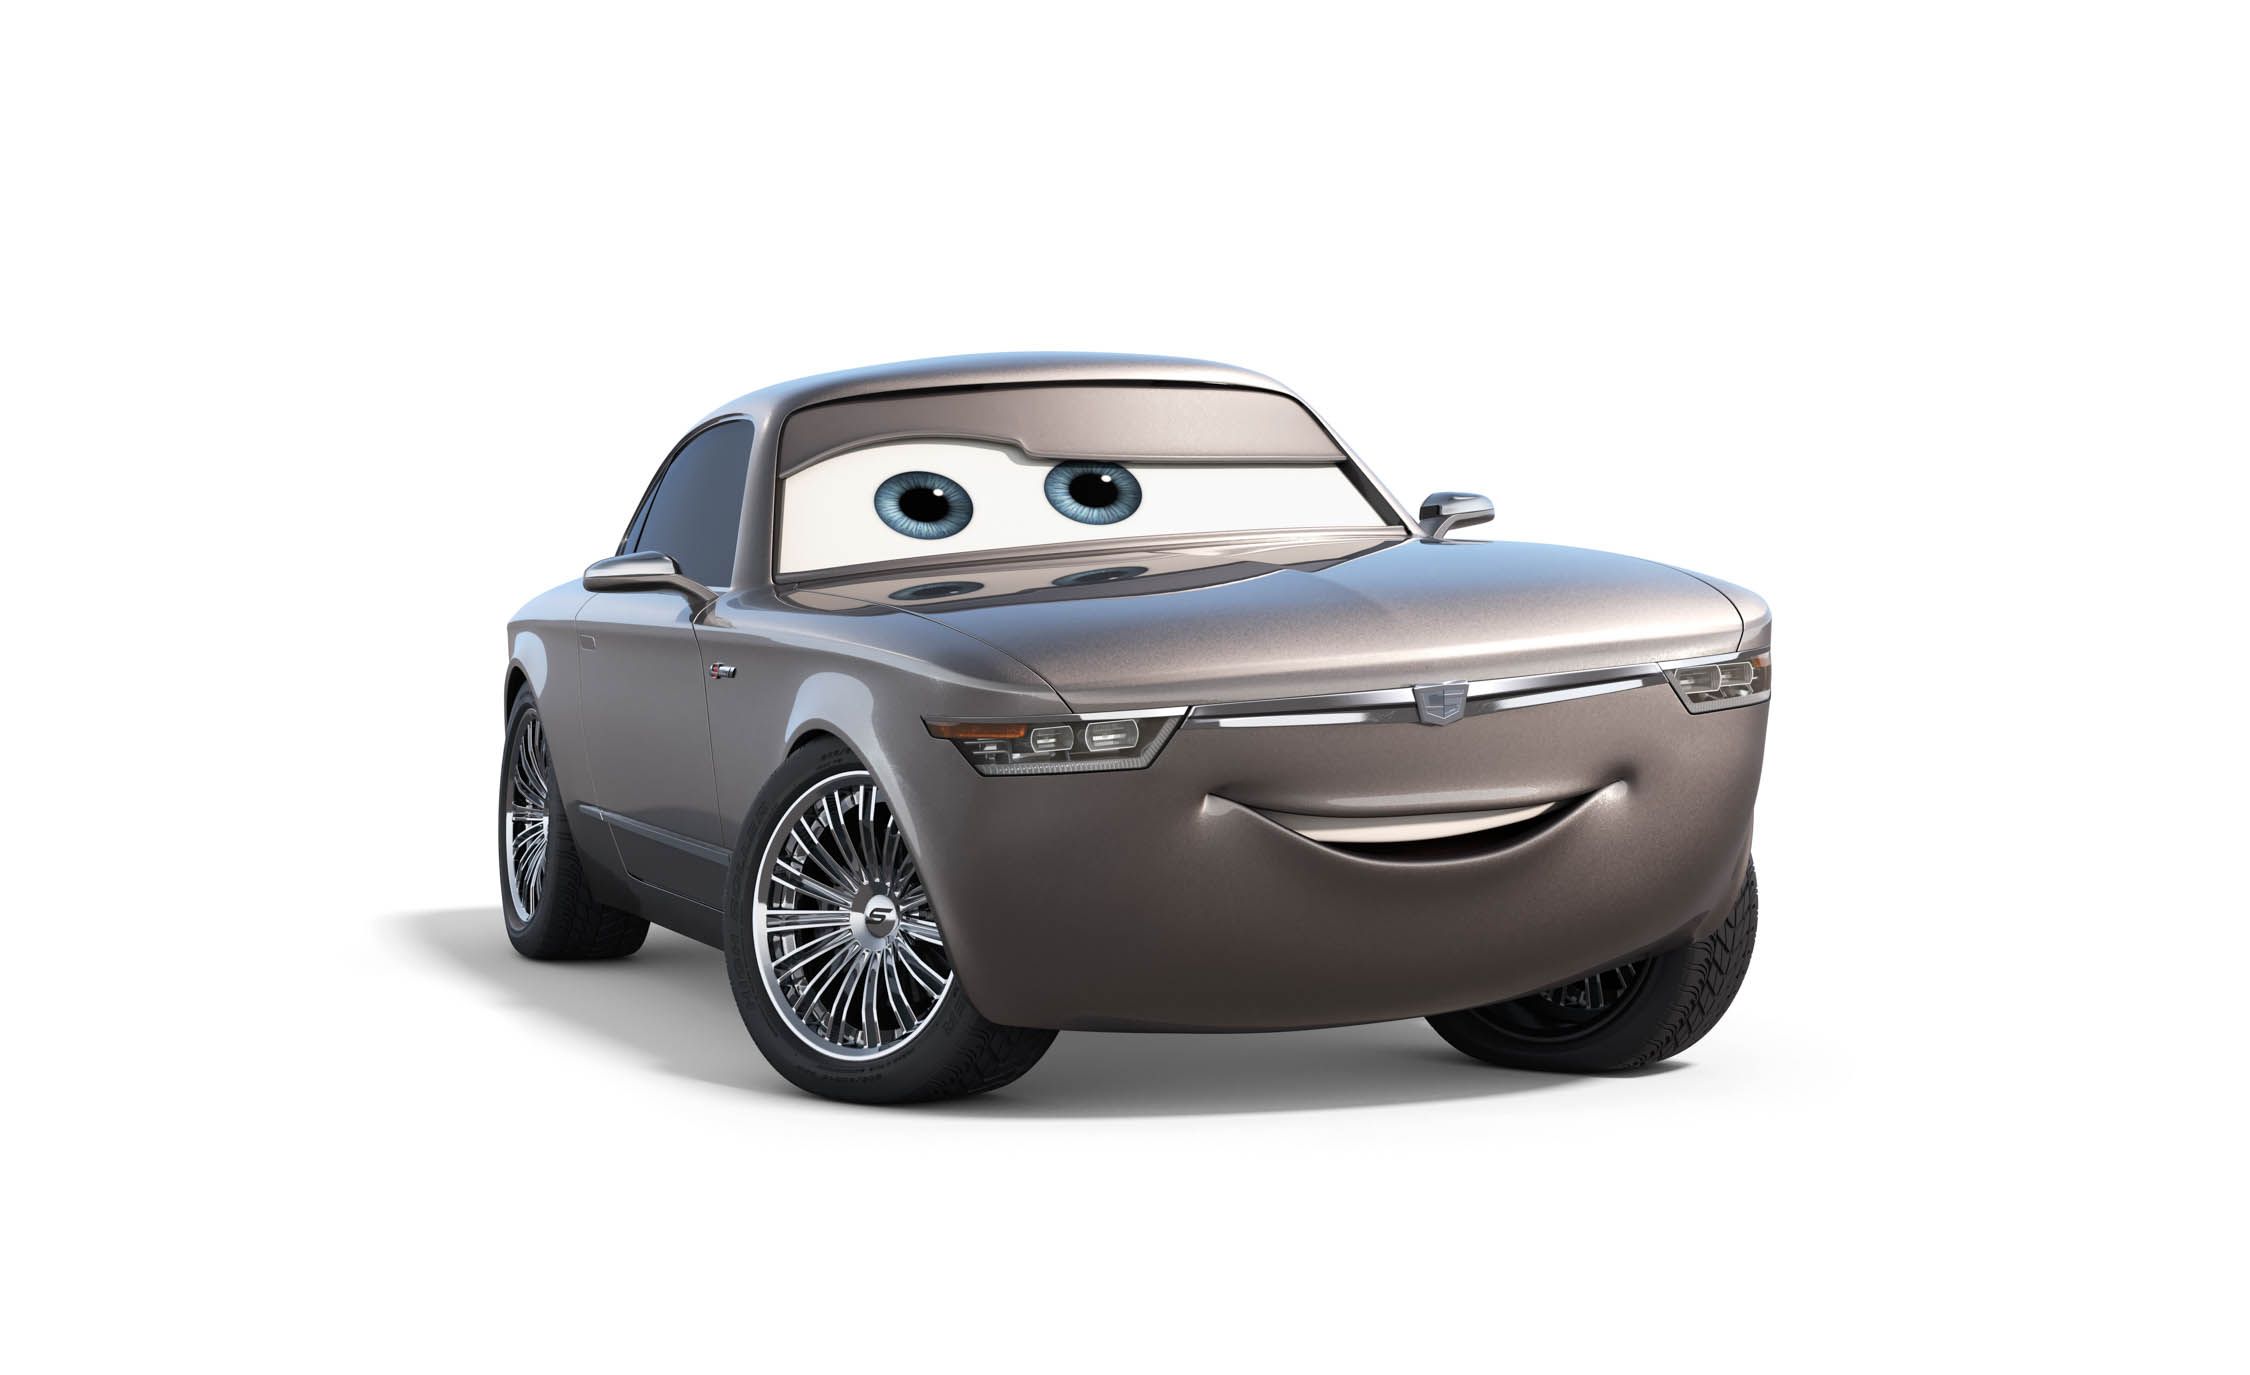 cars 3 movie characters